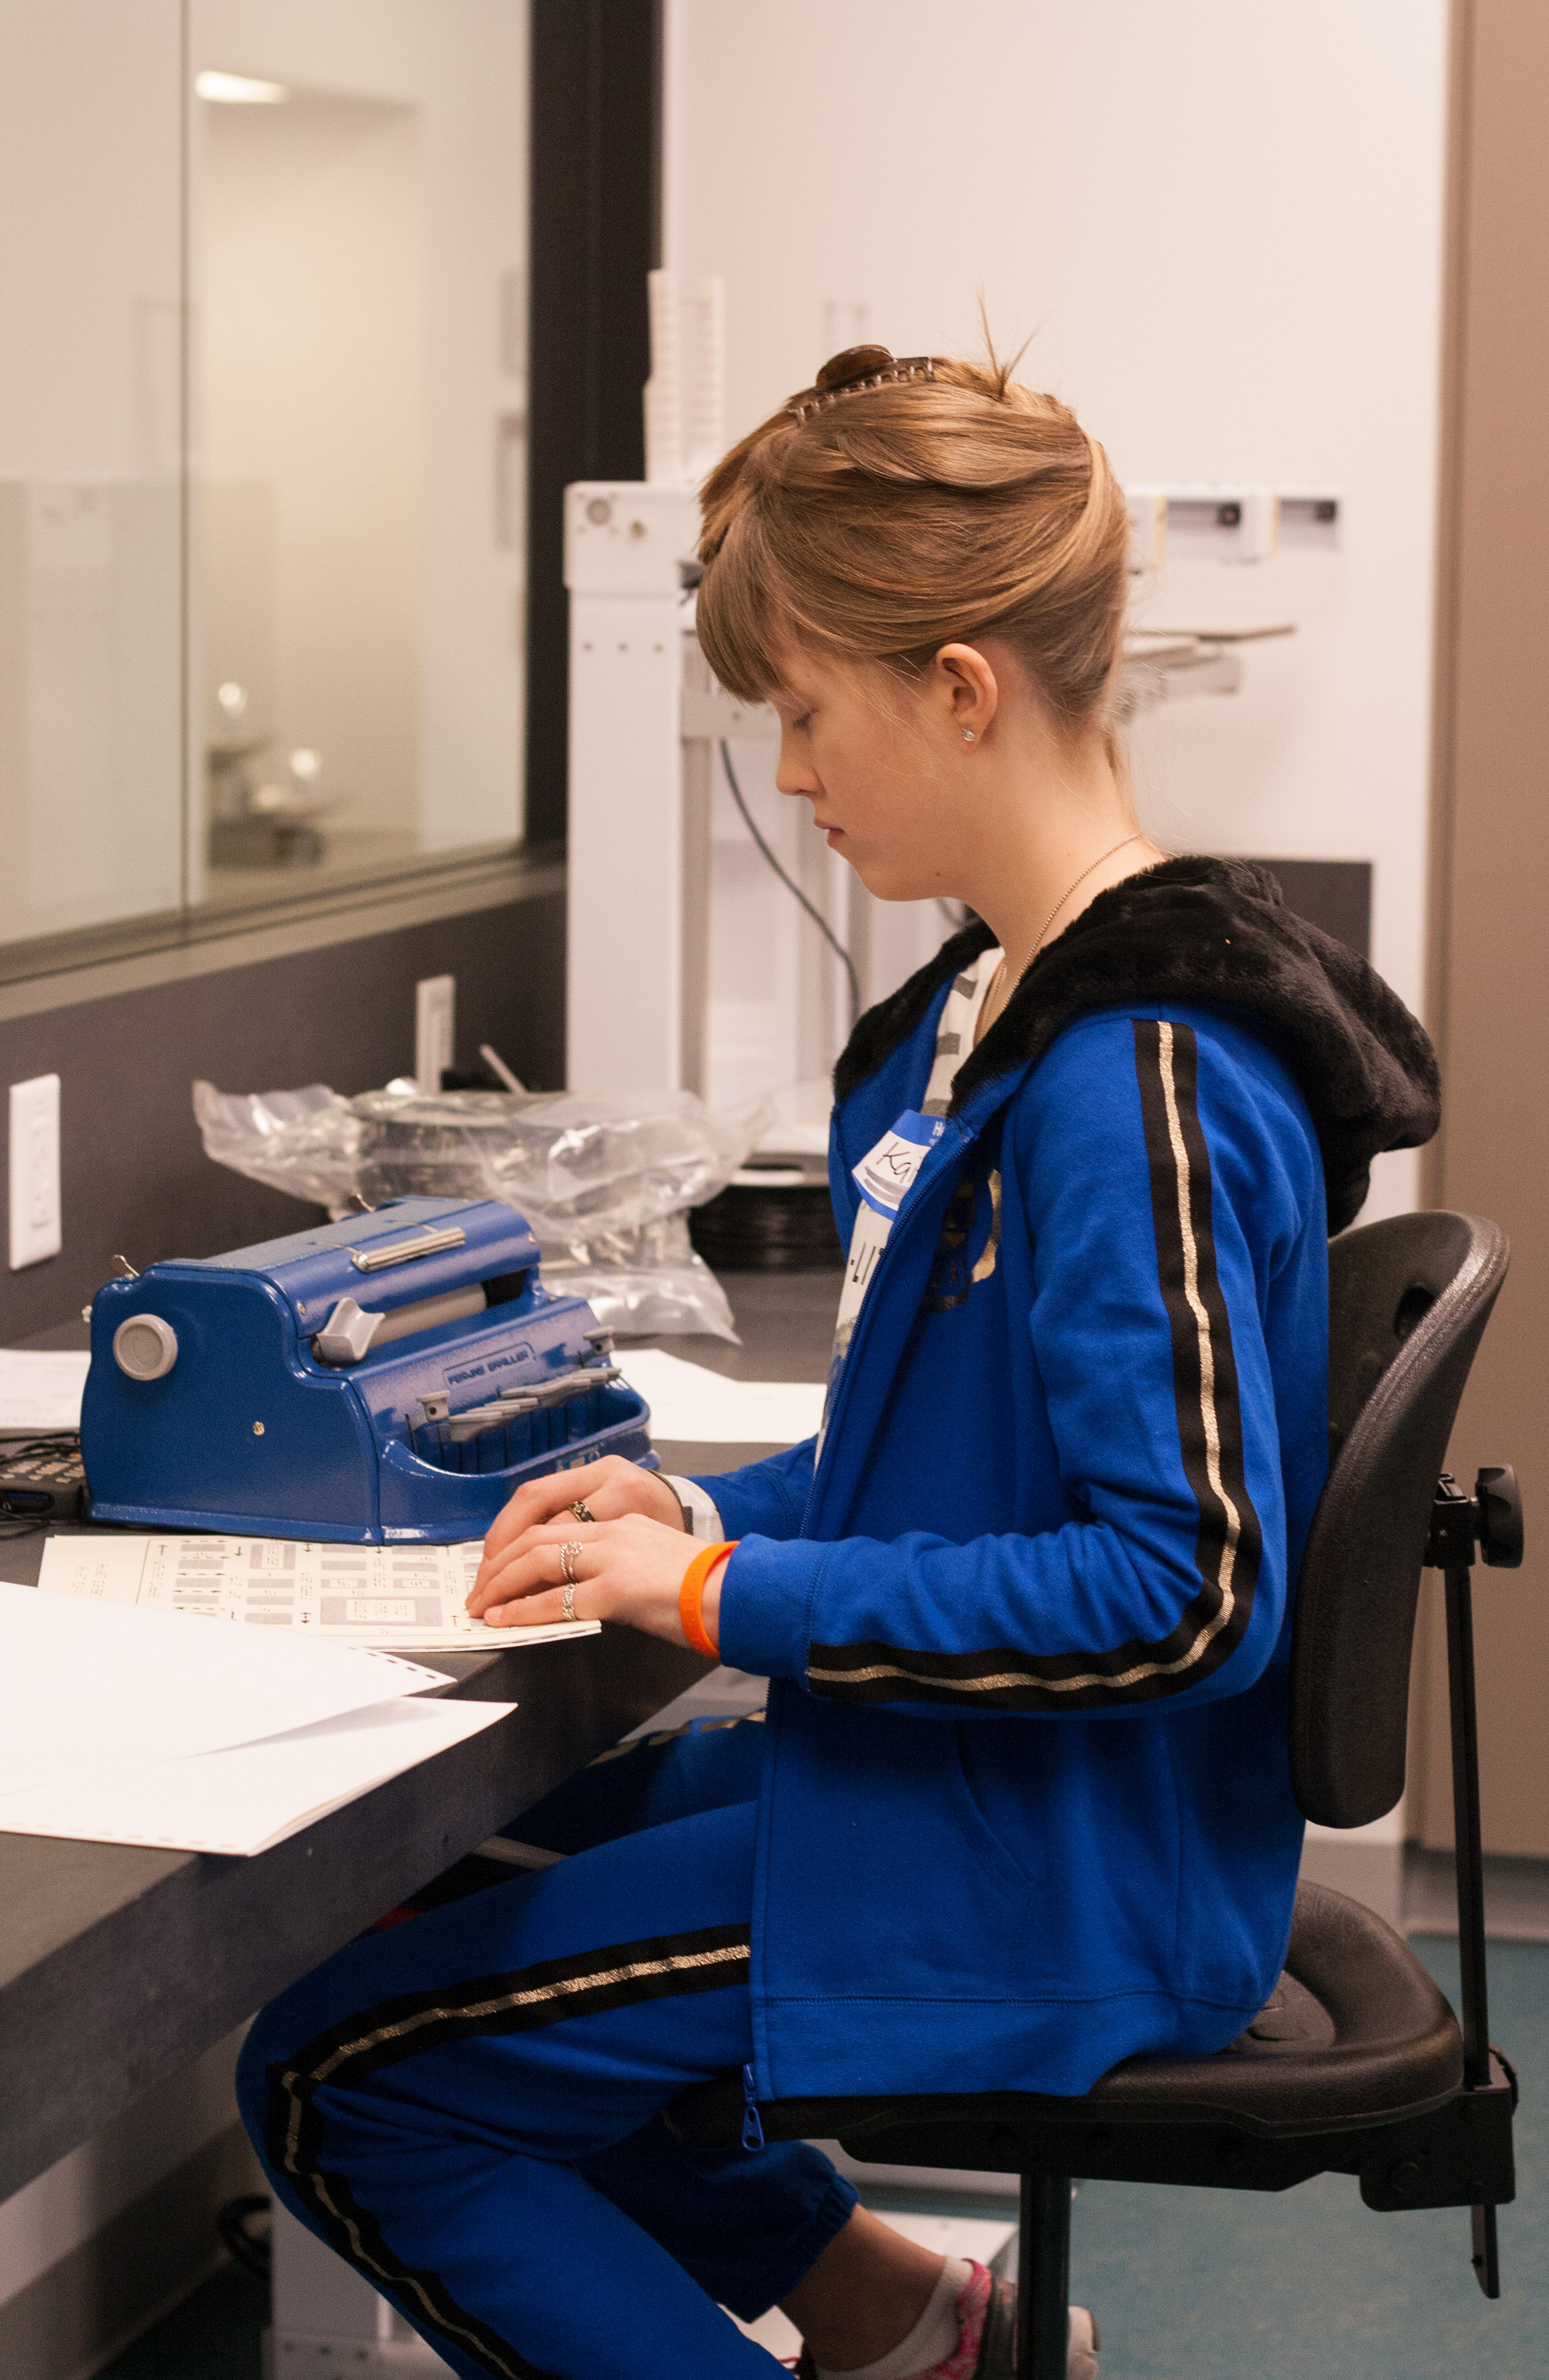 Junior Varsity competitor Kaitlyn reads a braille chart. She is wearing a royal blue tracksuit that nicely matches her royal blue brailler.